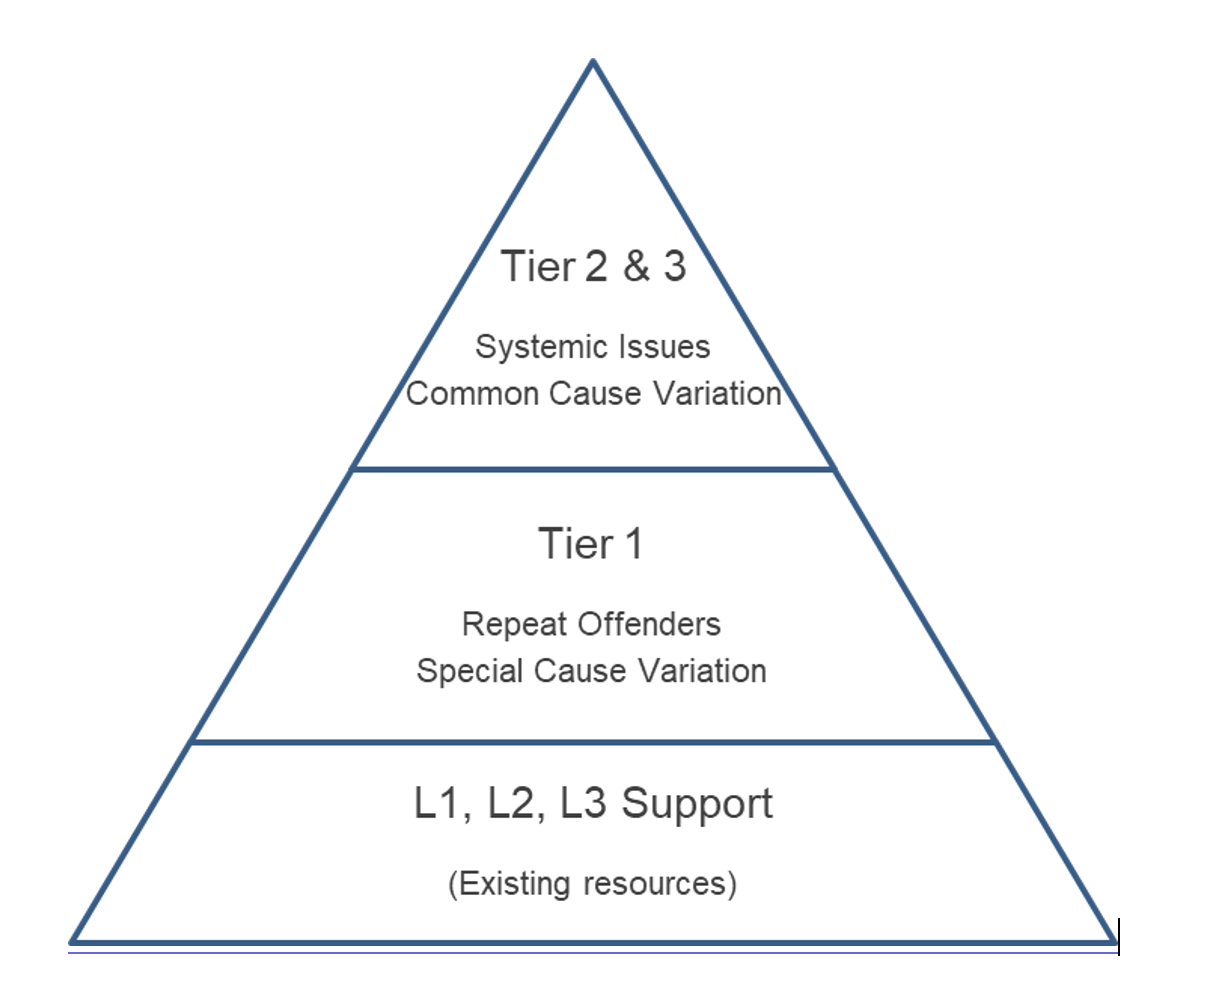 Image of the three tiers mentioned above